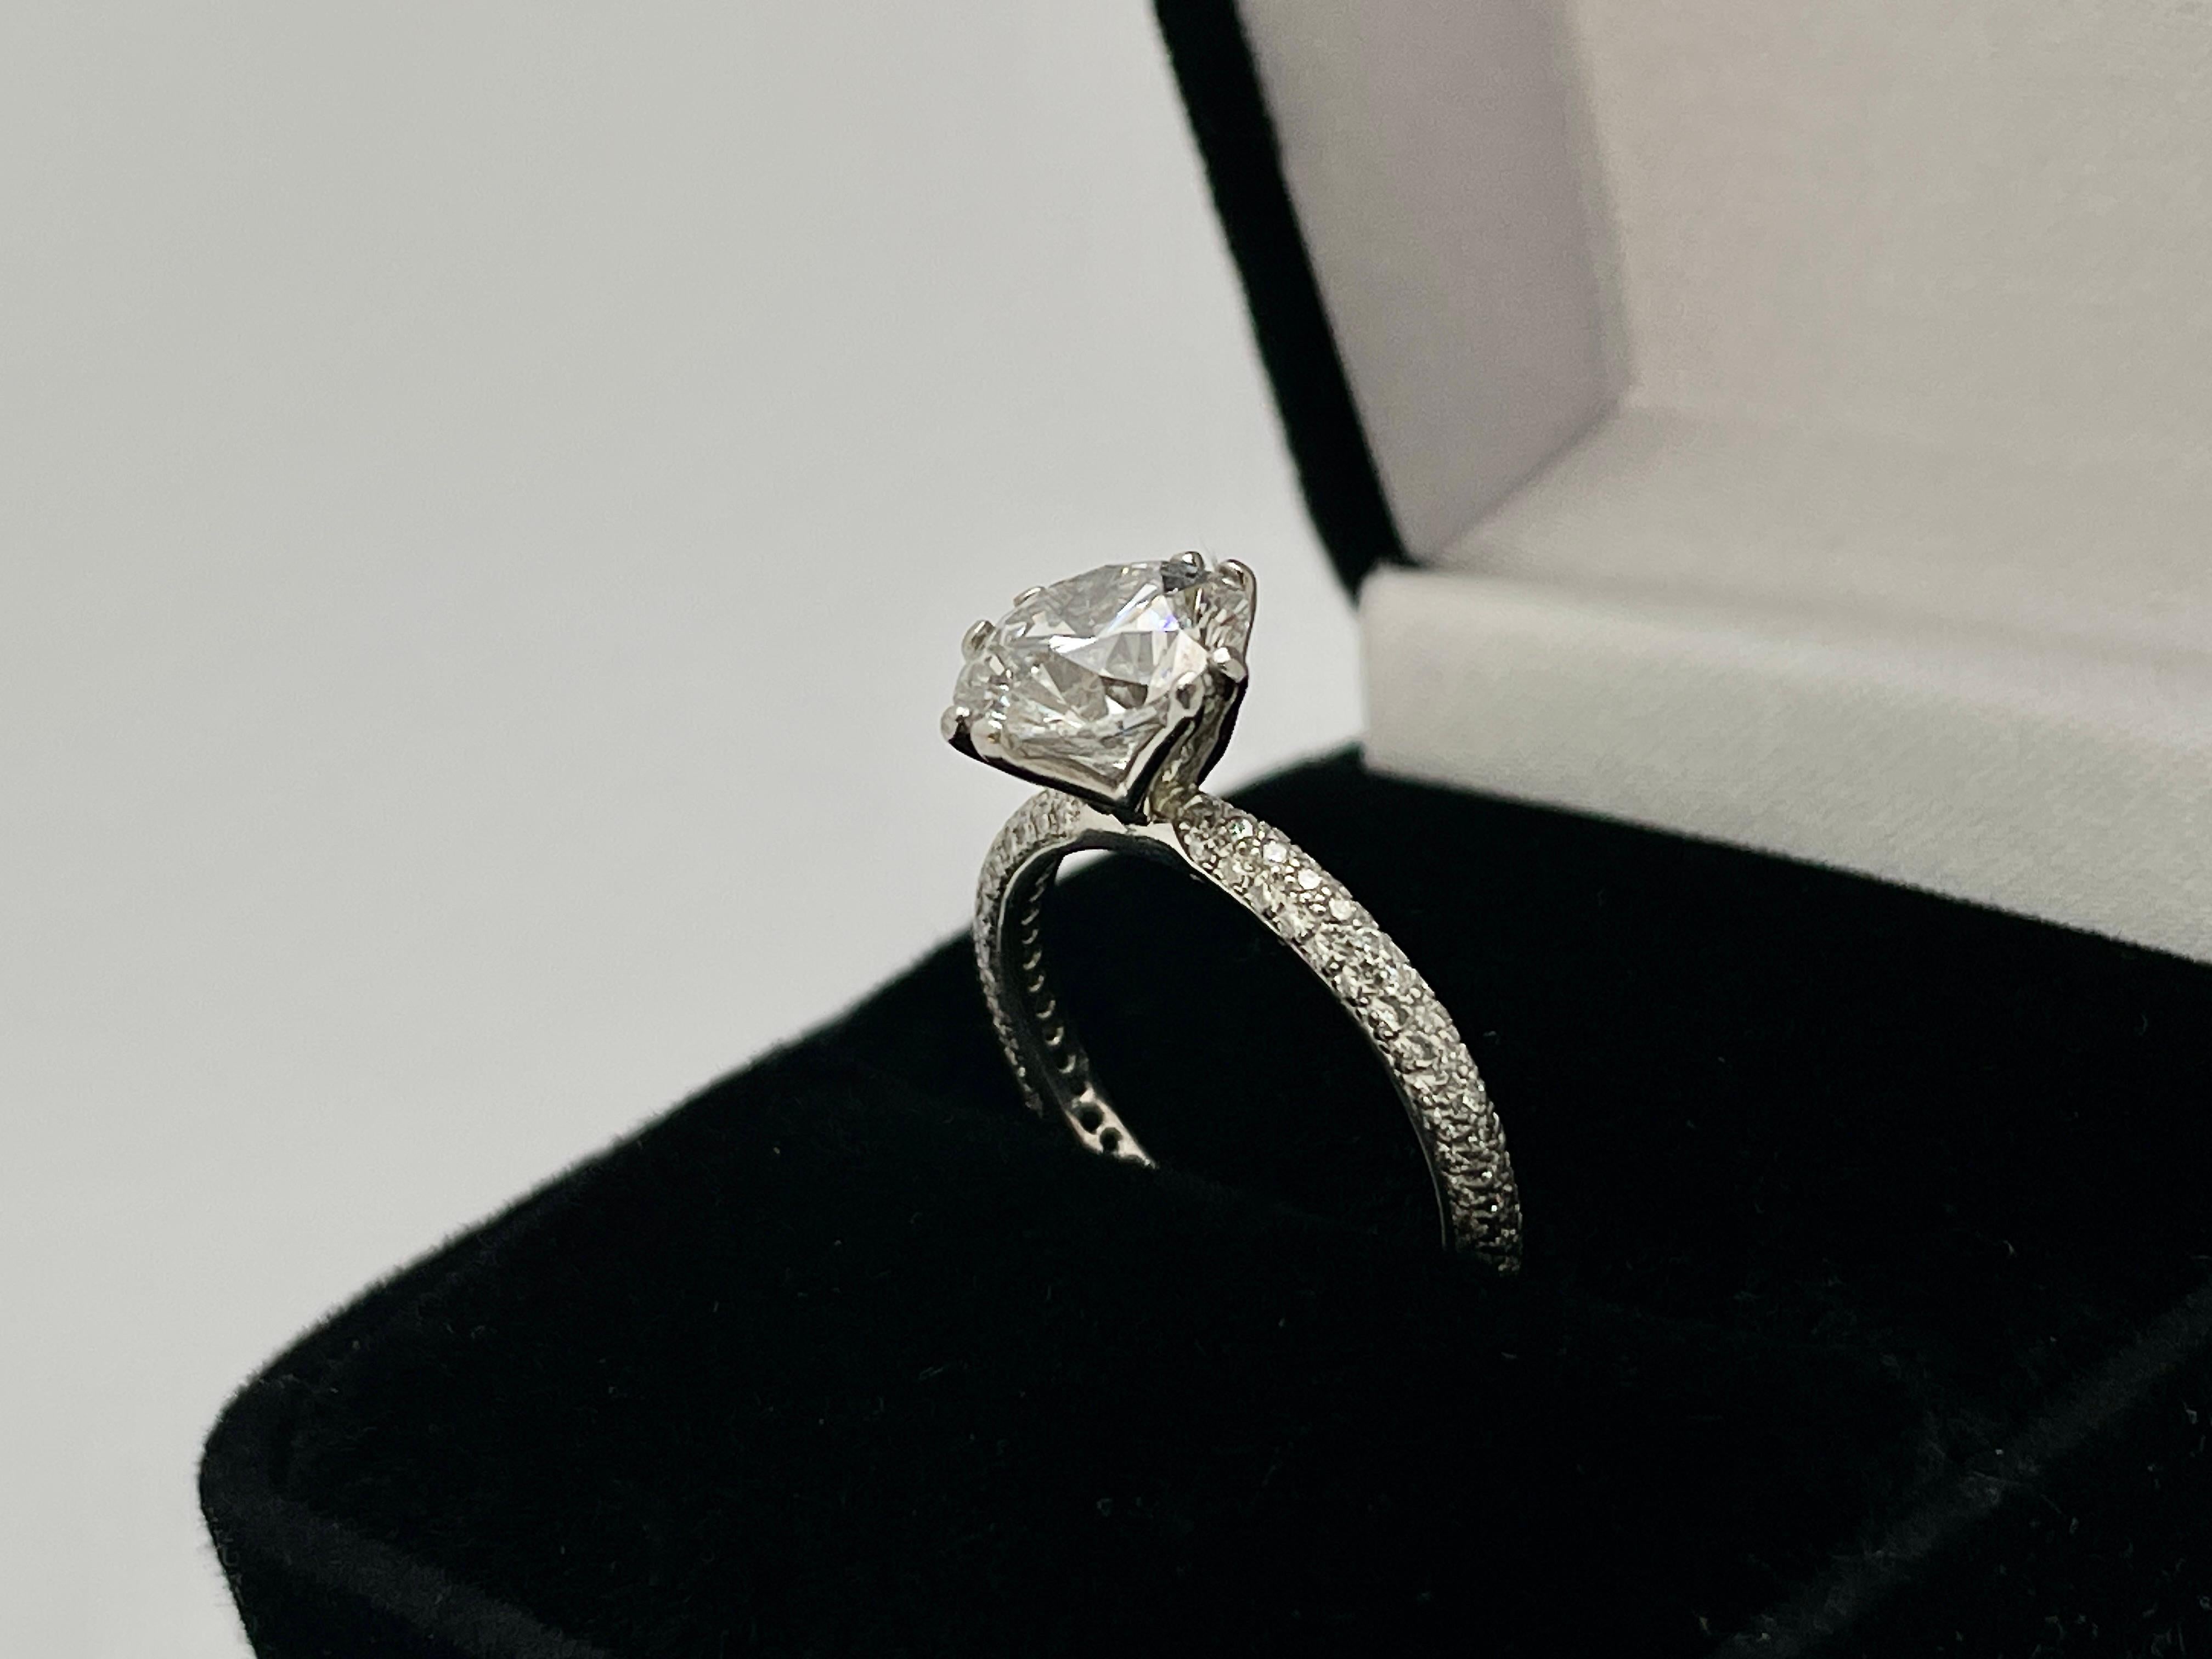 An original GIA certified diamond engagement ring, centered with one natural round brilliant cut diamond weighing 2.41 CT, measuring 8.58 - 8.66 x 5.40 mm, E color, SI2 clarity. Mounted on a hand-made platinum creative twin prong setting, with